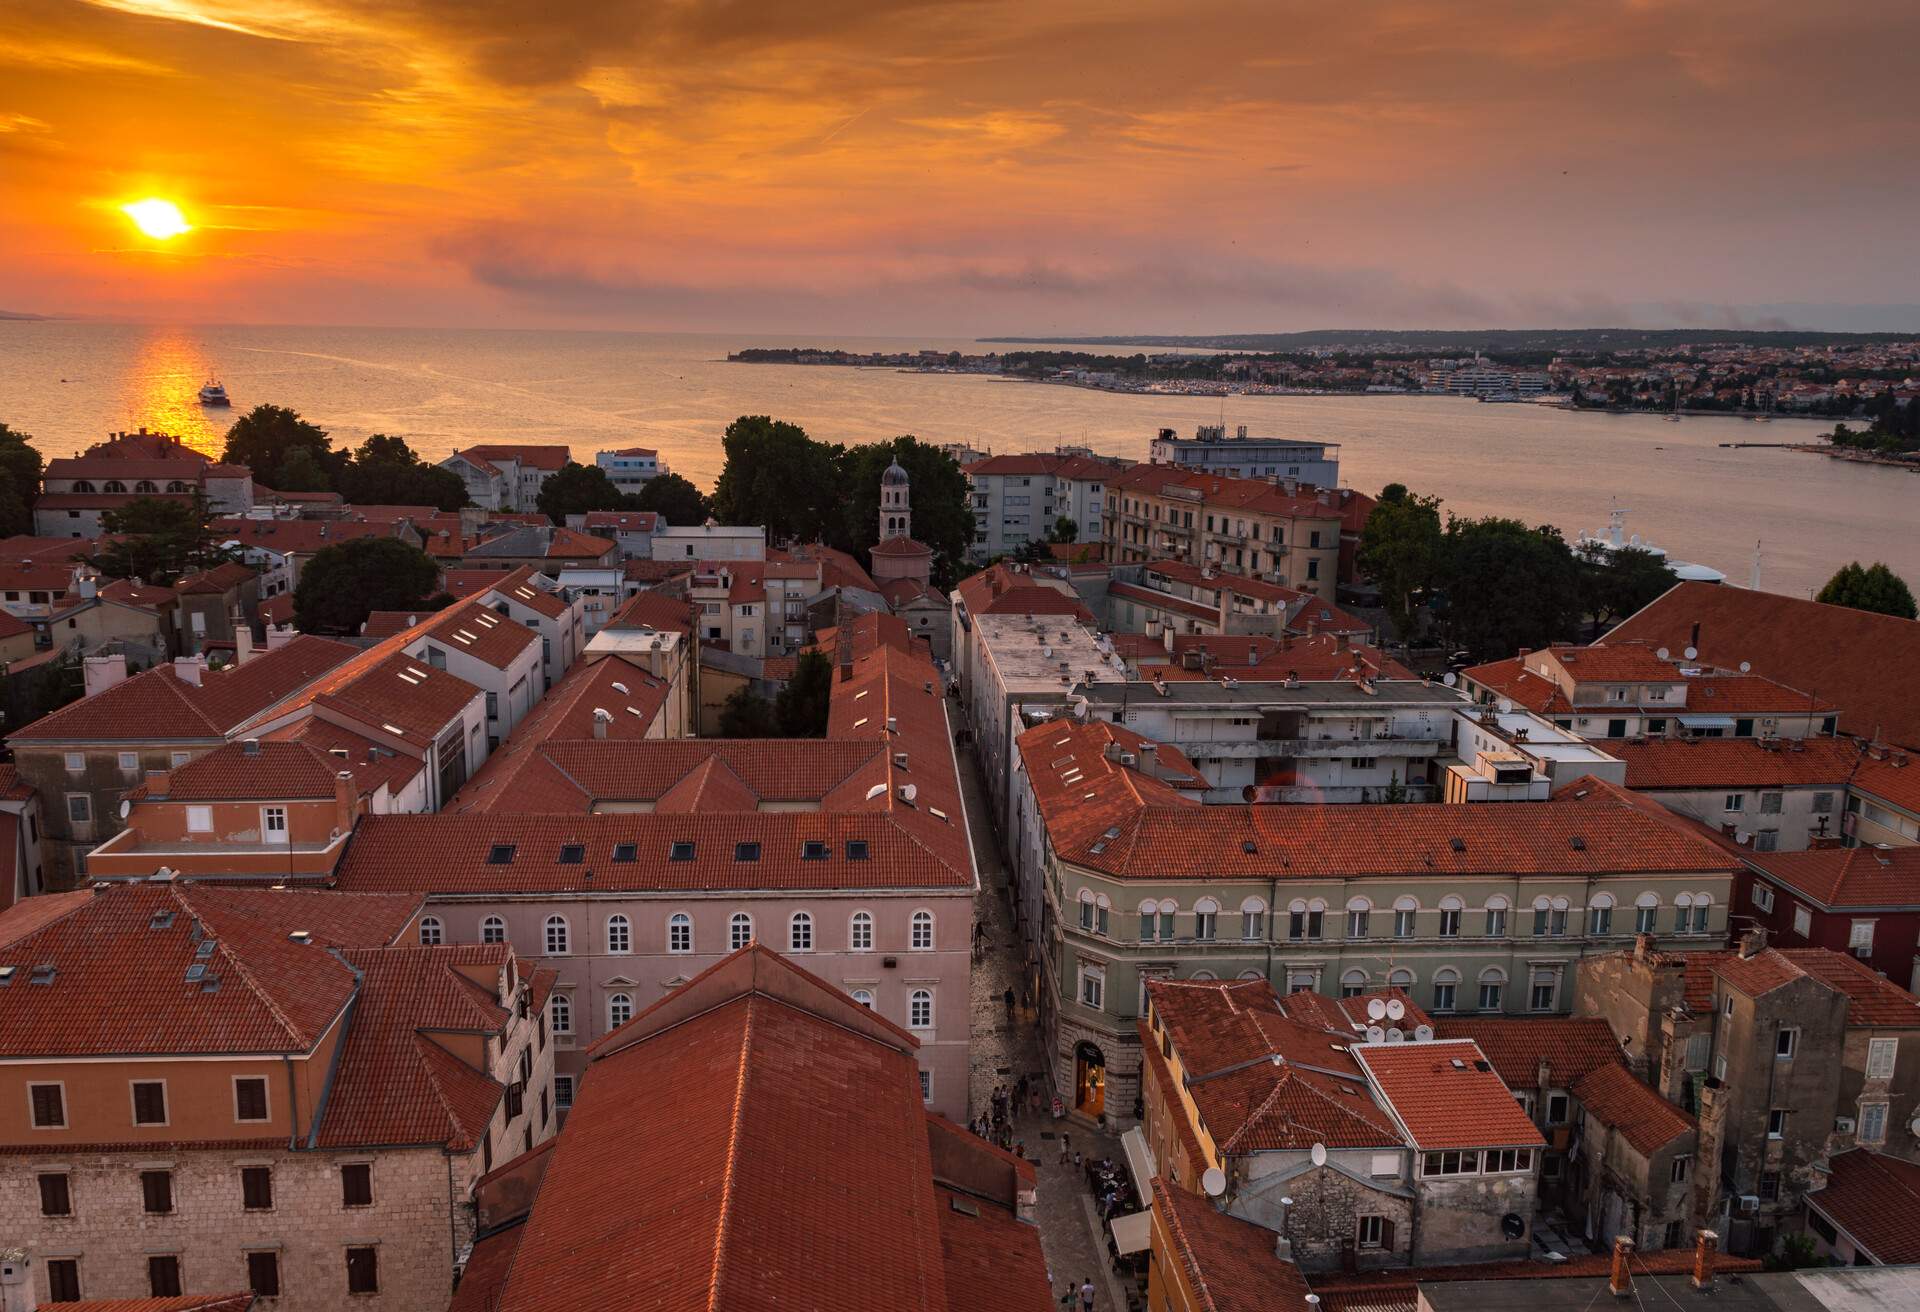 The views of Zadar from the bell tower of the cathedral are magnificent, if to this you add the wonderful dusk that takes place in these latitudes the result is spectacular.Zadar is a city monument, surrounded by historical ramparts, a treasury of the archaeological and monumental riches of ancient and medieval times, Renaissance and many contemporary architectural achievements such as the first sea organs in the world.